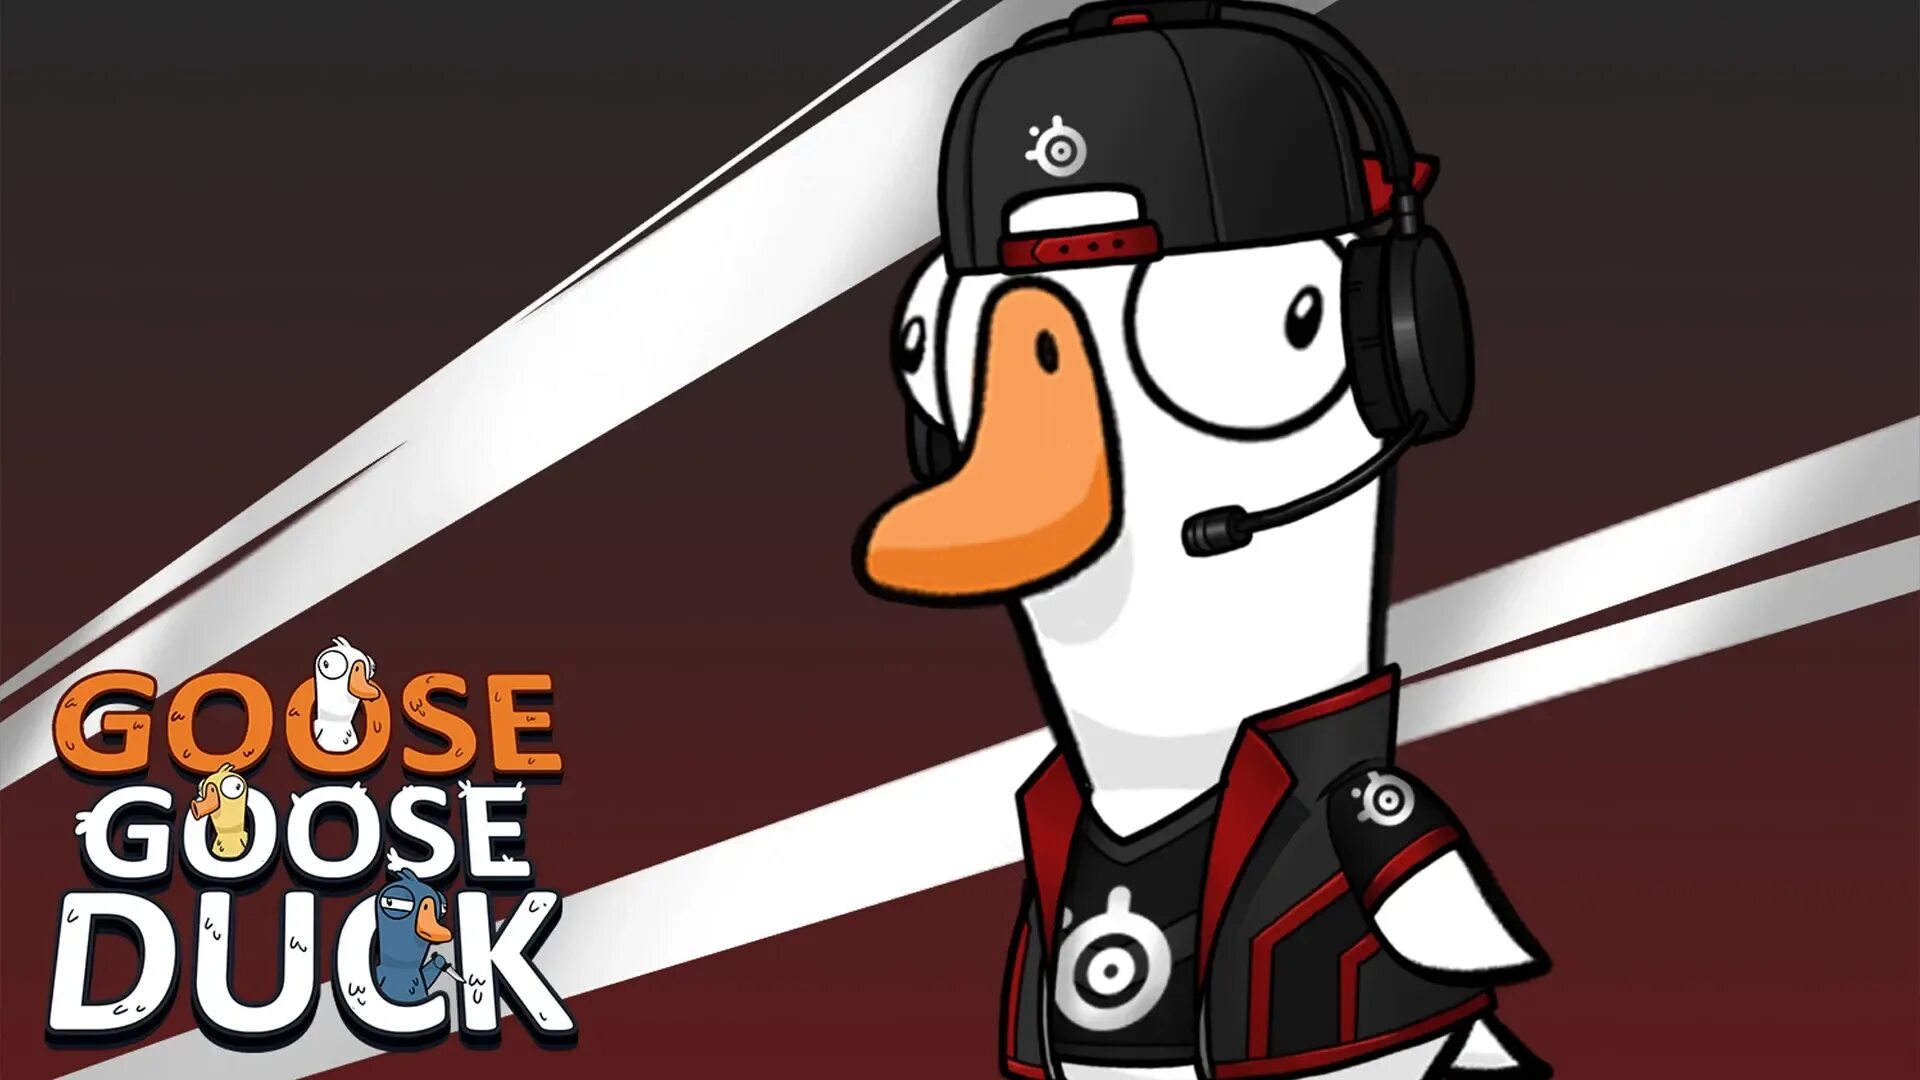 Гусь гусь даг. Гусгус дак. Goose Duck game\. Steam Goose Goose Duck игра. Гусь Гус Гус дак.